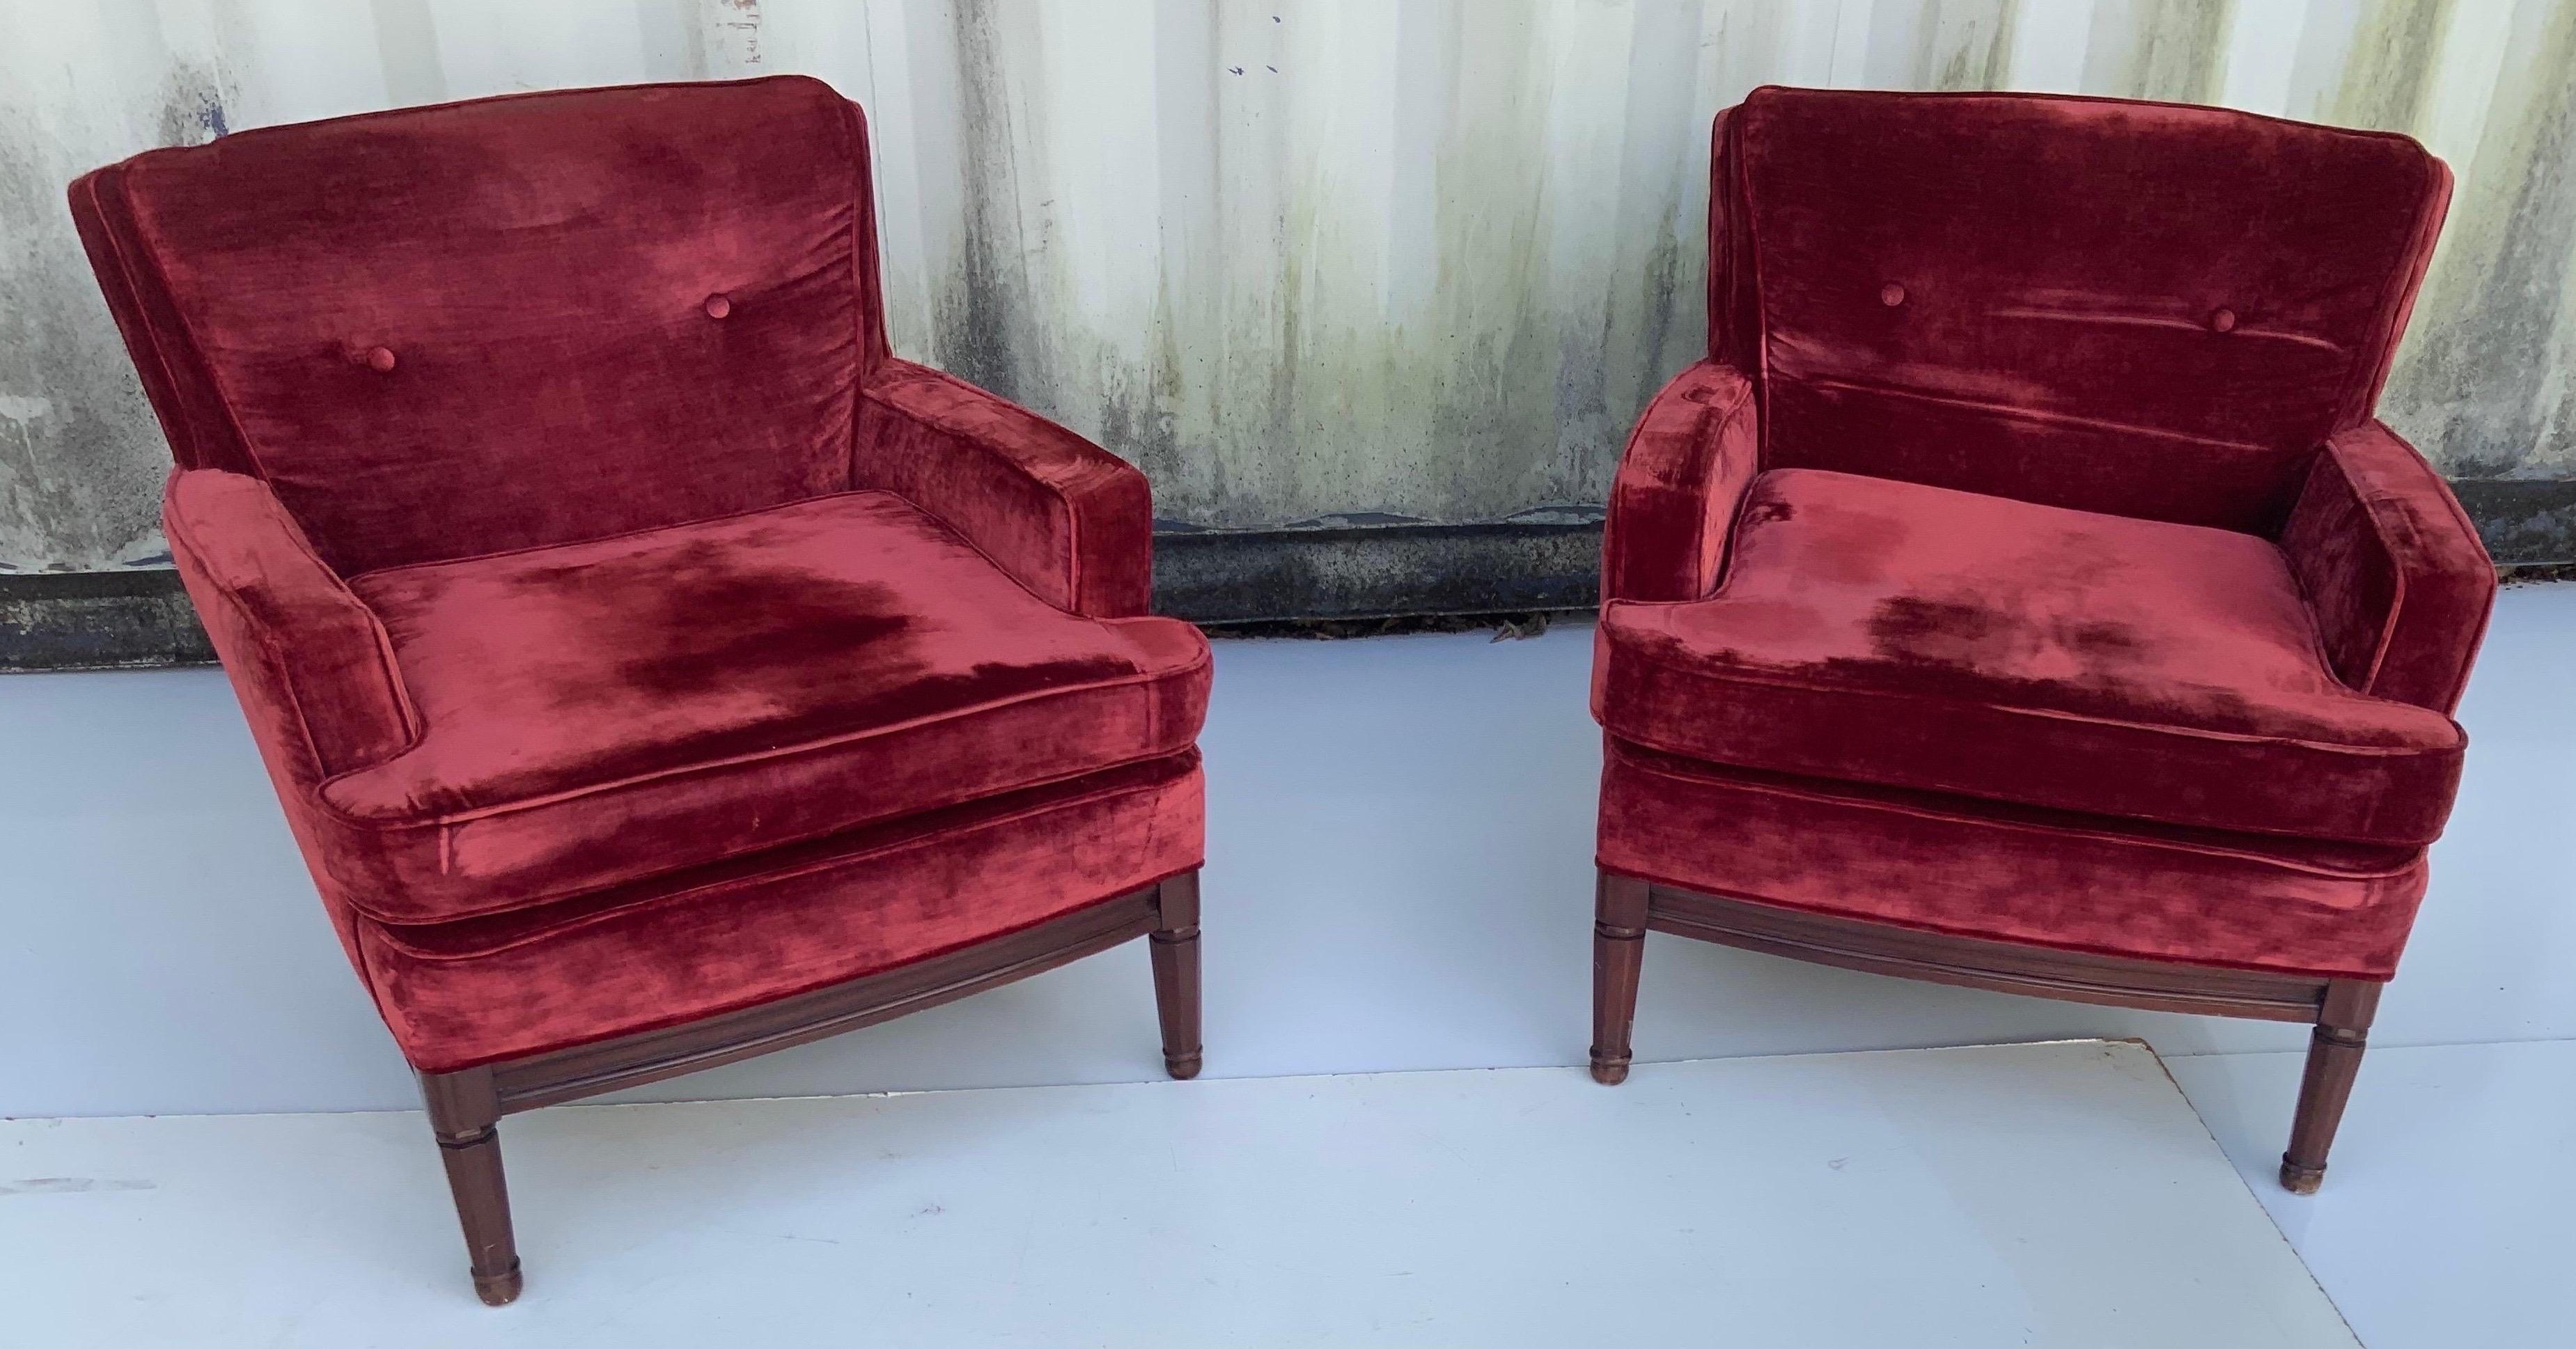 Pair of French neoclassical Maison Jansen lounge chairs circa 1960. 2 Pairs available.
Priced by pair 
Original velvet fabric, very good condition.
Sturdy and very comfortable.